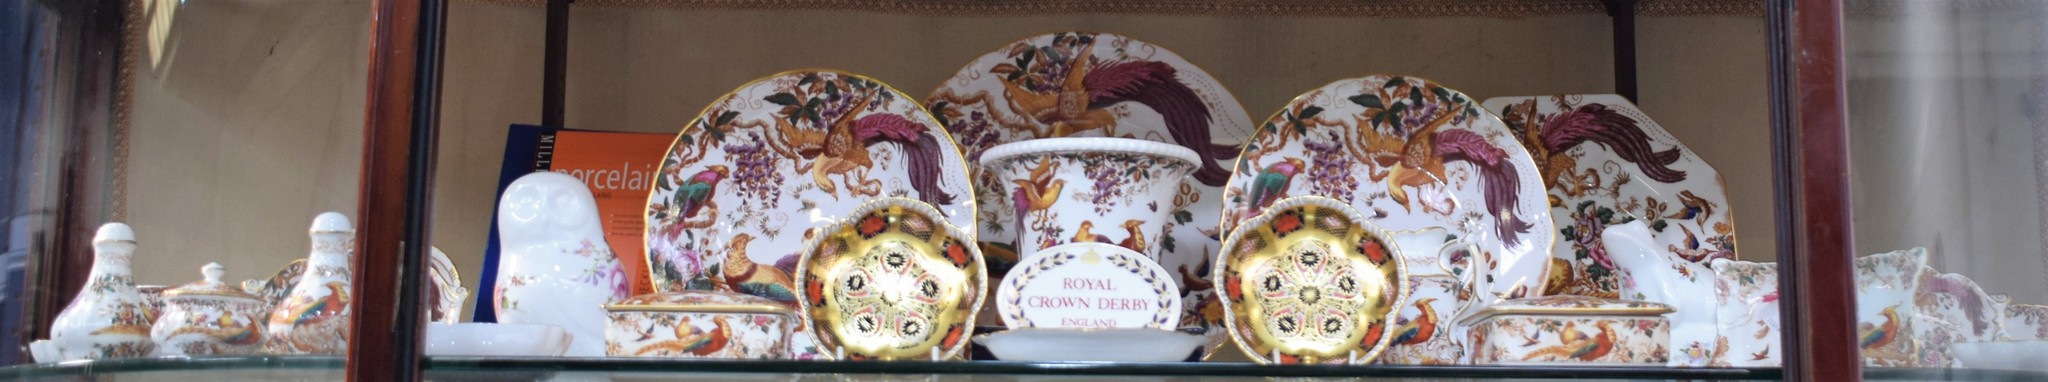 Ceramics - Royal Crown Derby Old Avesbury pattern, including vases, trinket boxes, plates, cups,